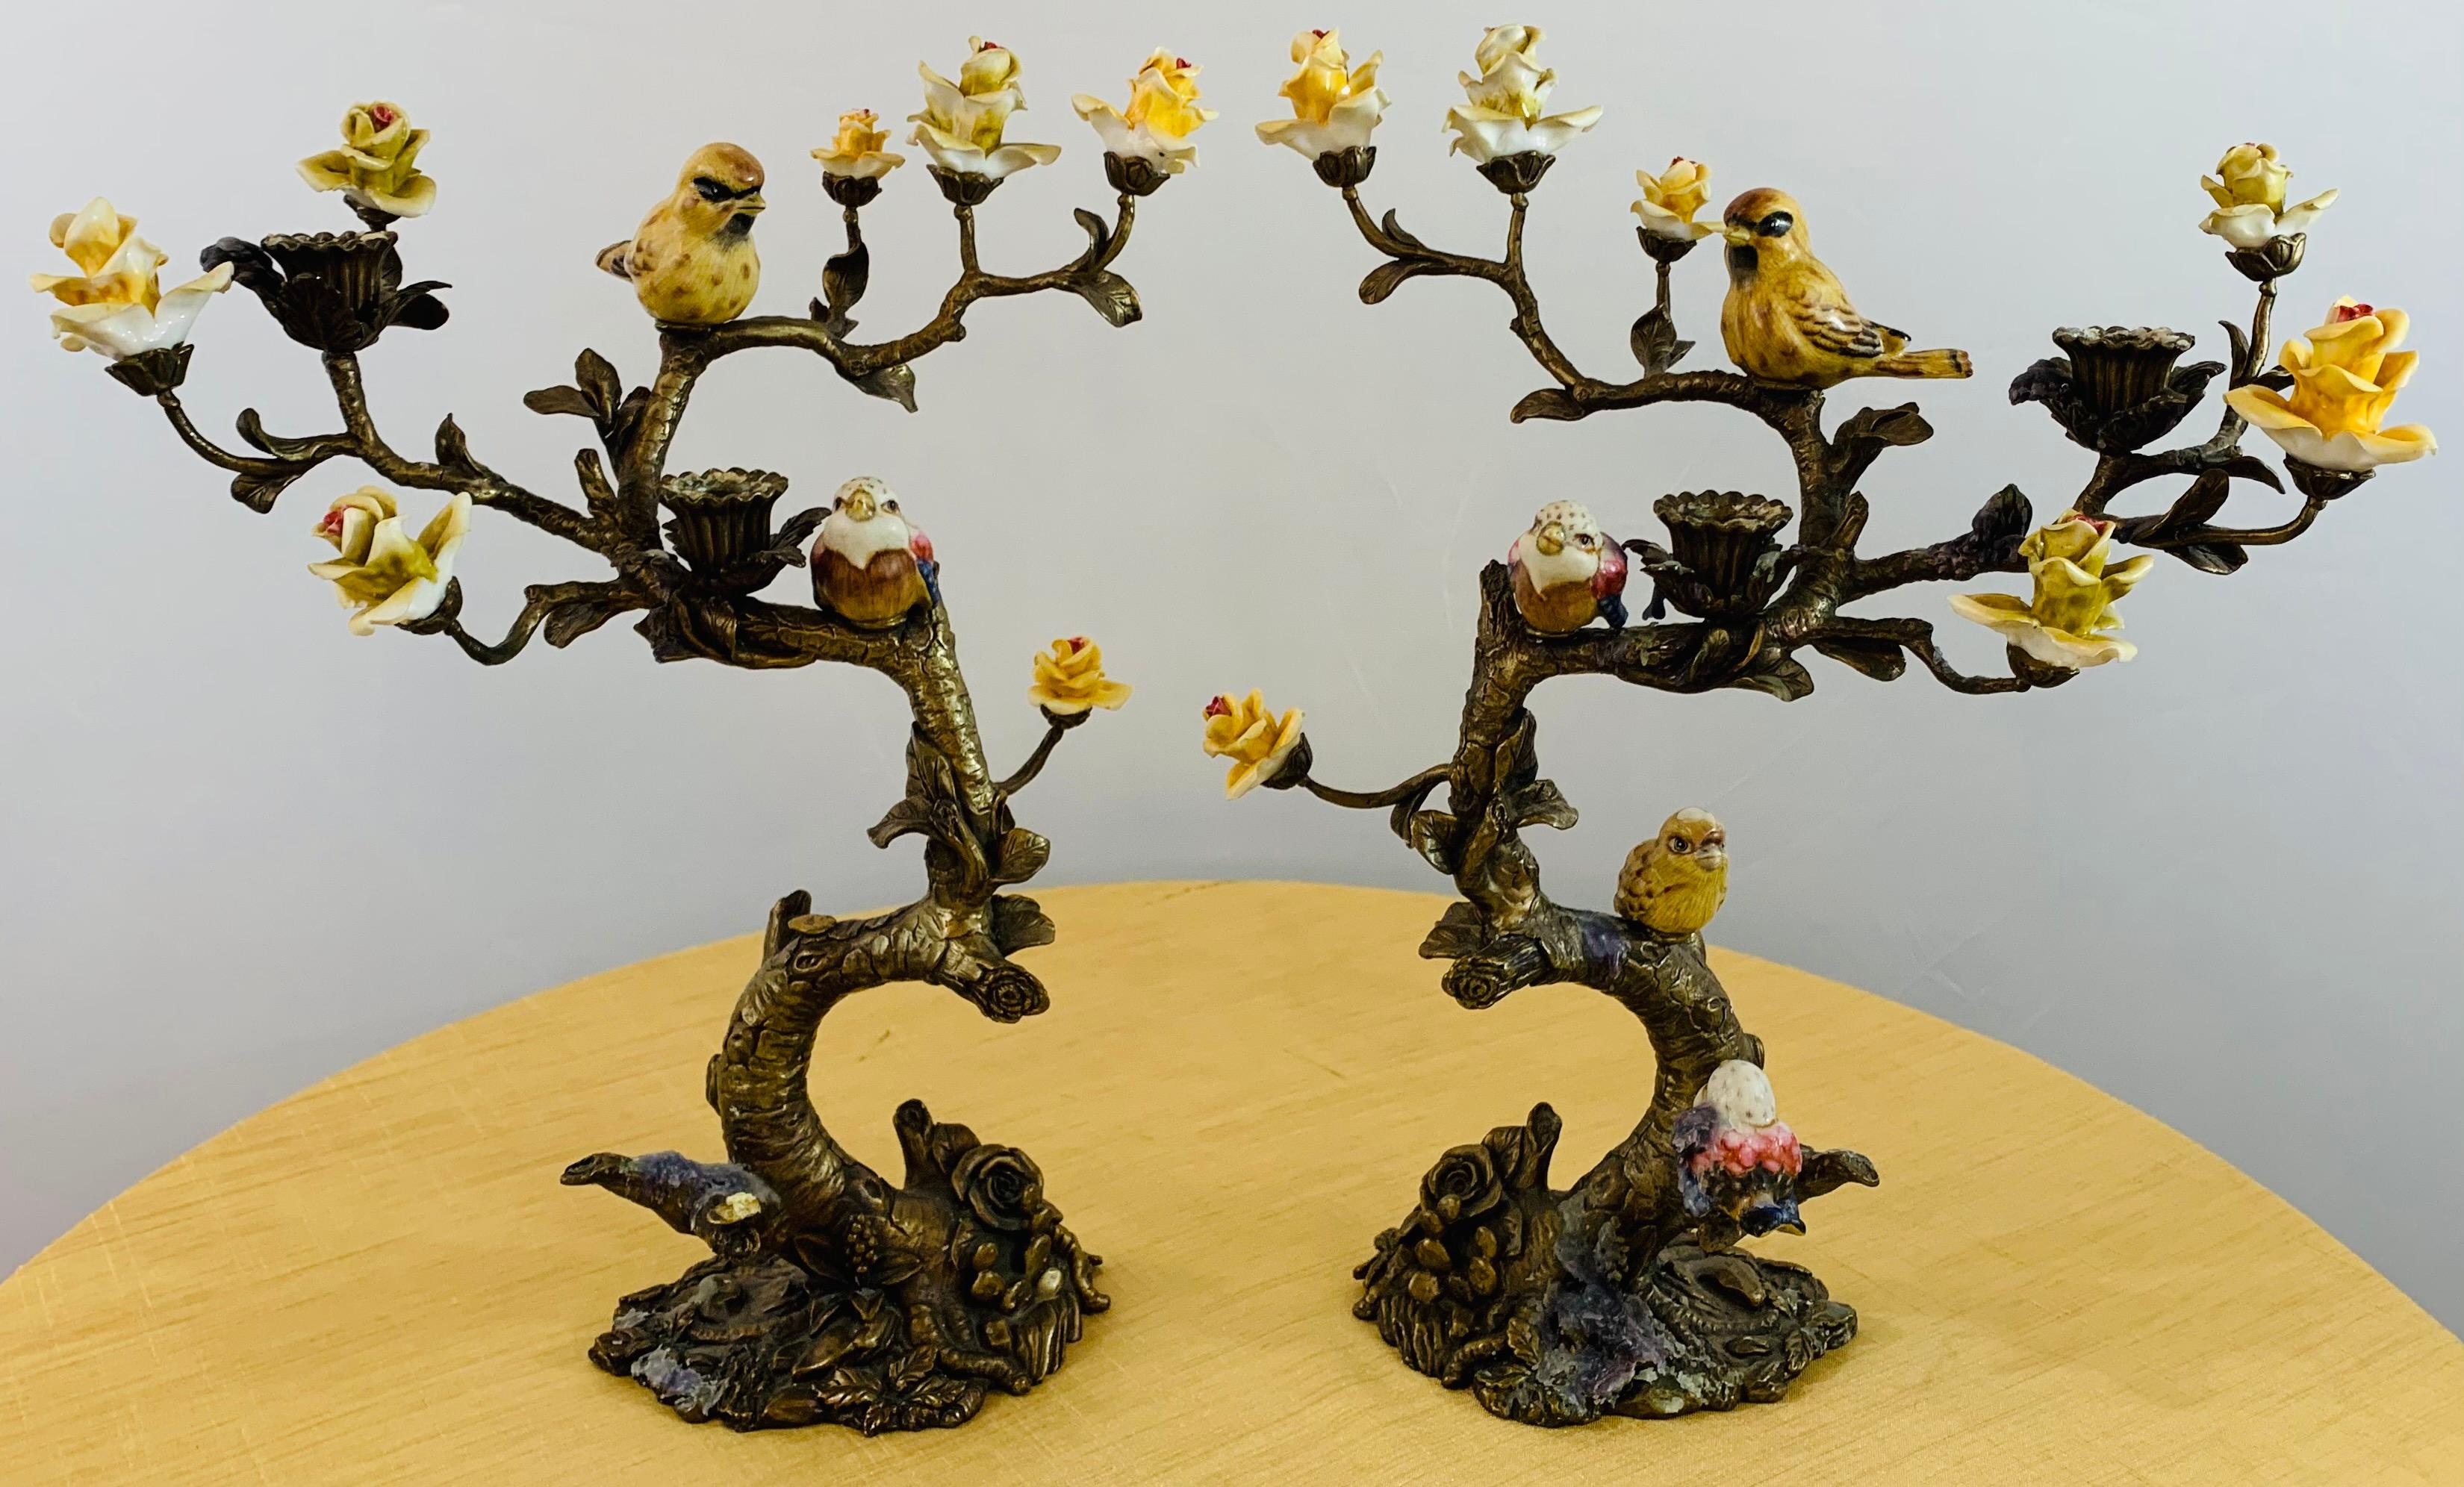 A beautiful pair of candleholders / candelabras crafted in Bronze in a shape of a tree with colorful ceramic flowers and birds. Each candelabra can hold two candles. This pair will add style to your dining experience and create an amazing ambiance